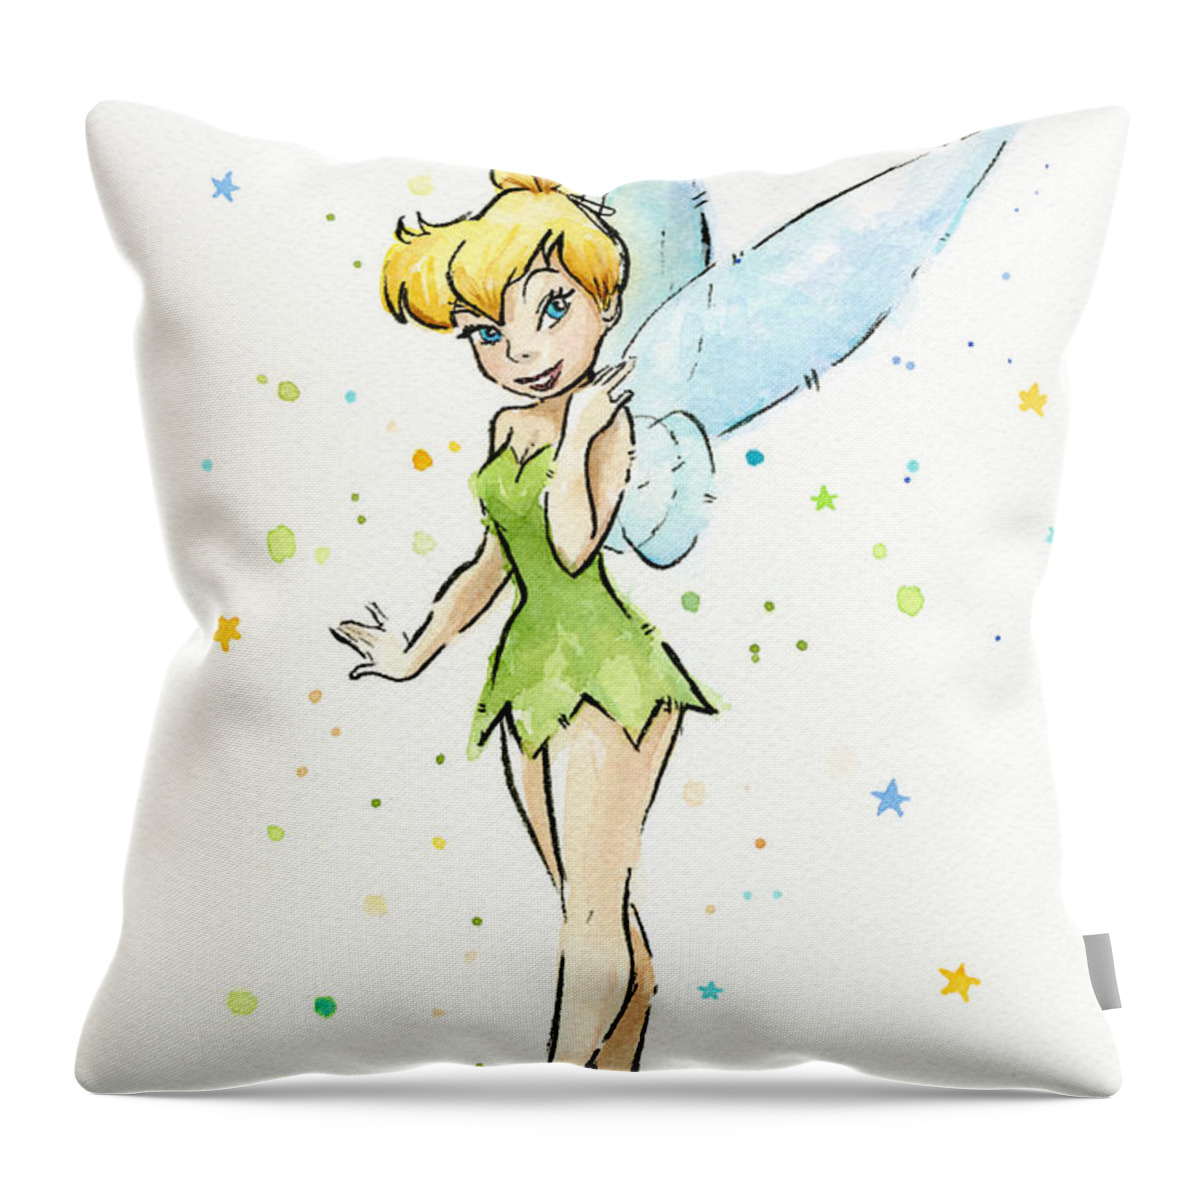 Tinker Throw Pillow featuring the painting Tinker Bell by Olga Shvartsur